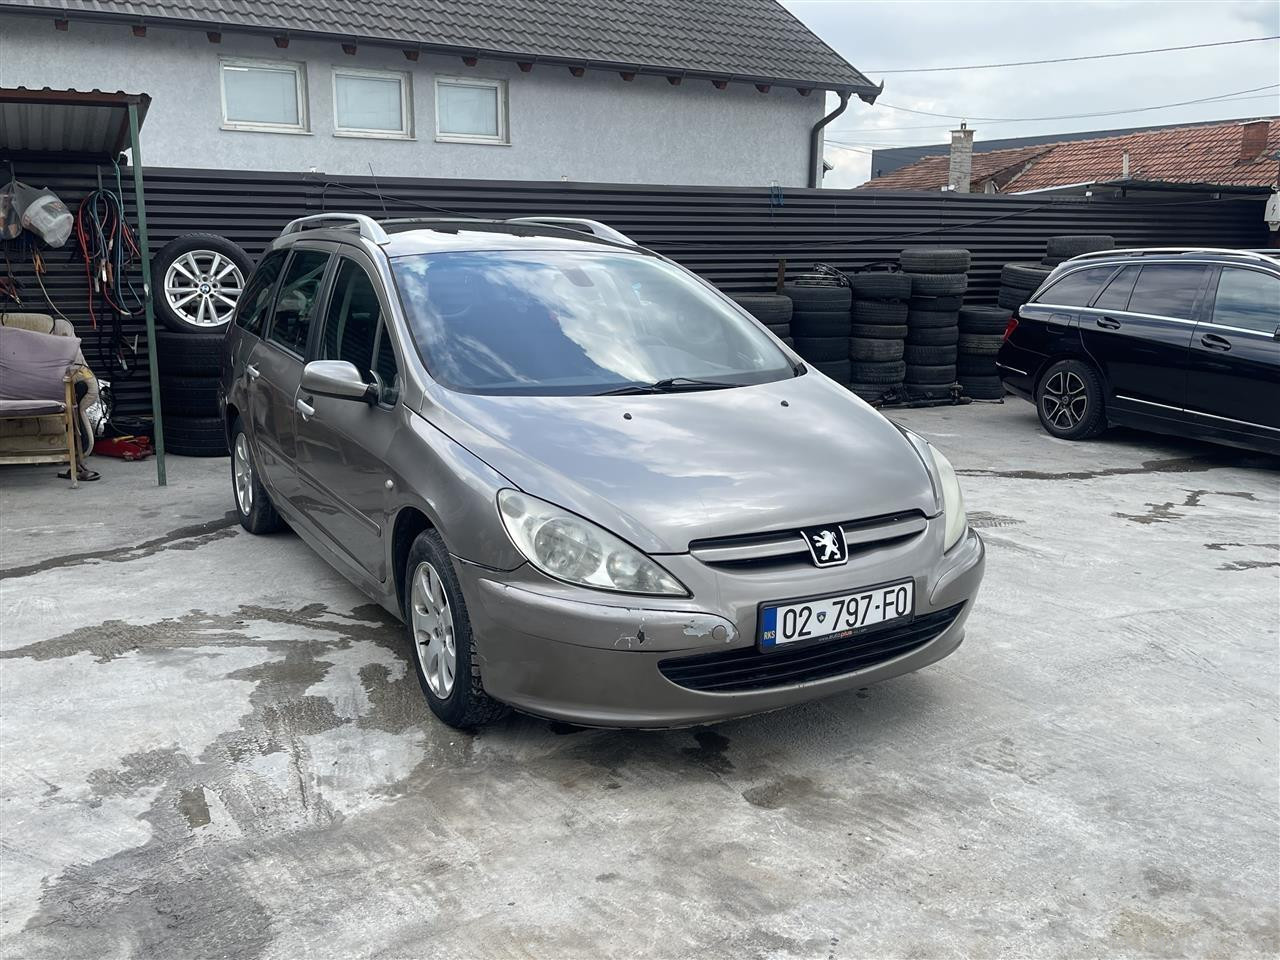 SHES PEUGEOT 307 2.0 HDI 10 muj rks